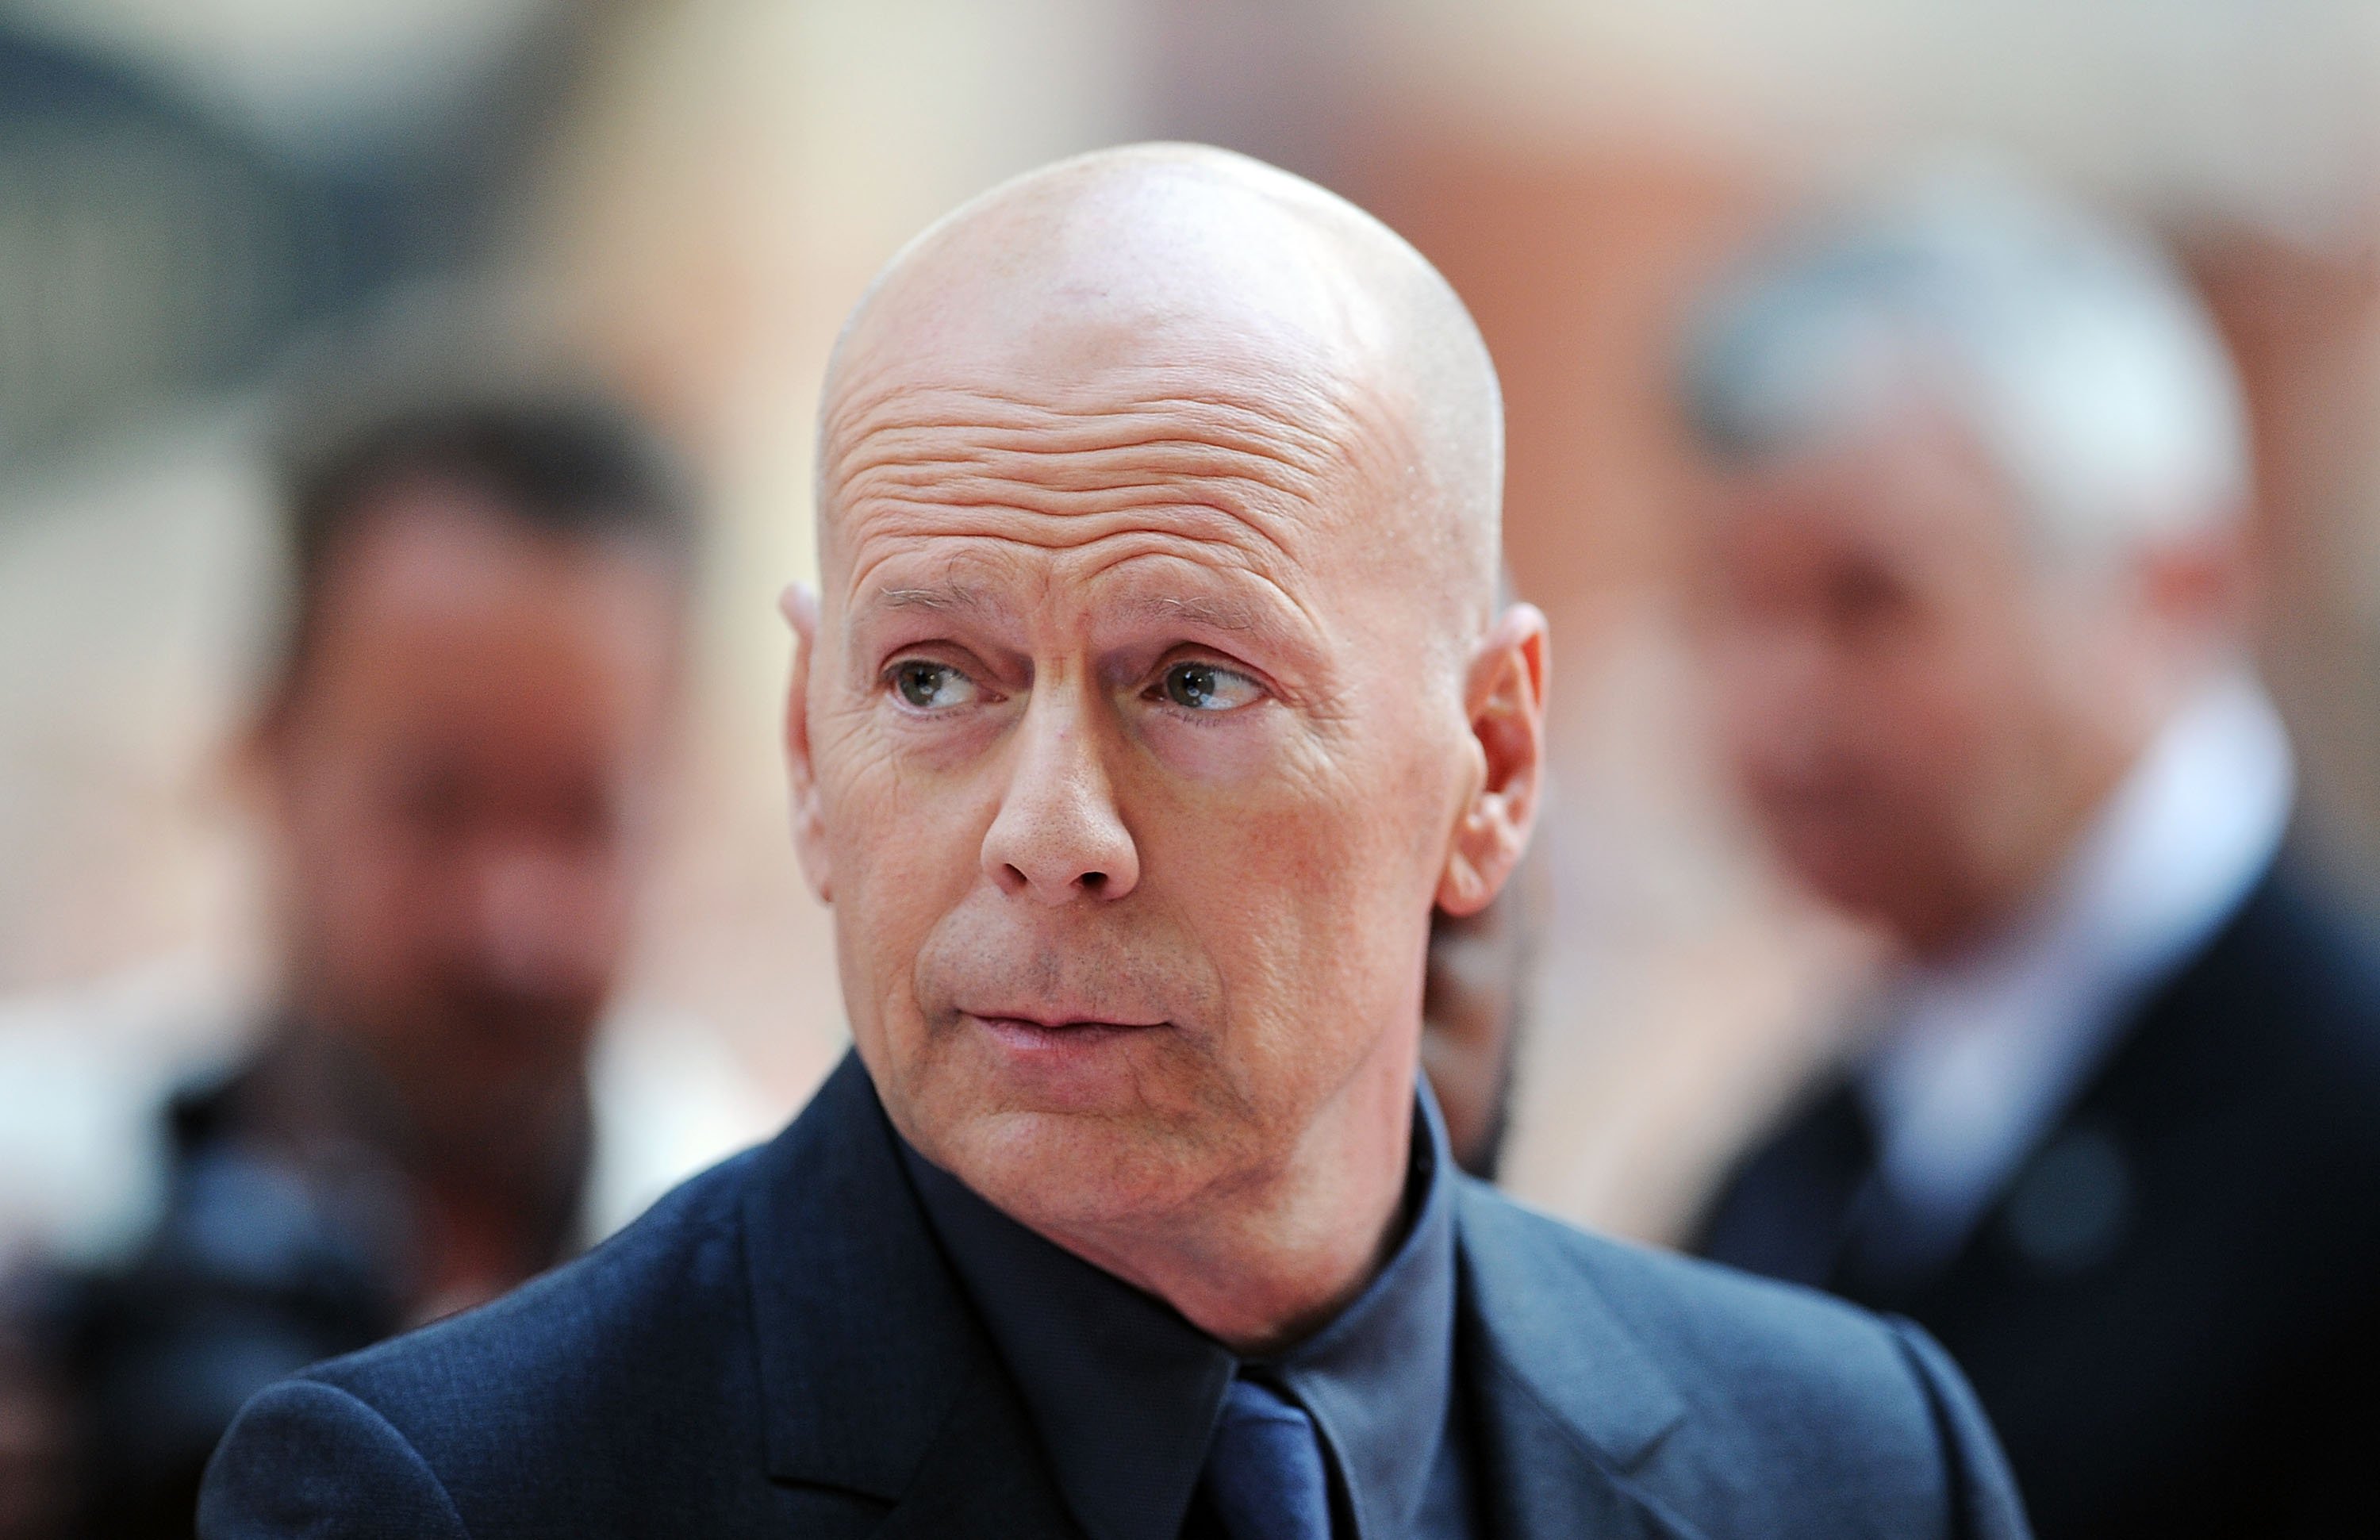 Bruce Willis, Premiere "Red 2" in London, England, 2013 | Quelle: Getty Images